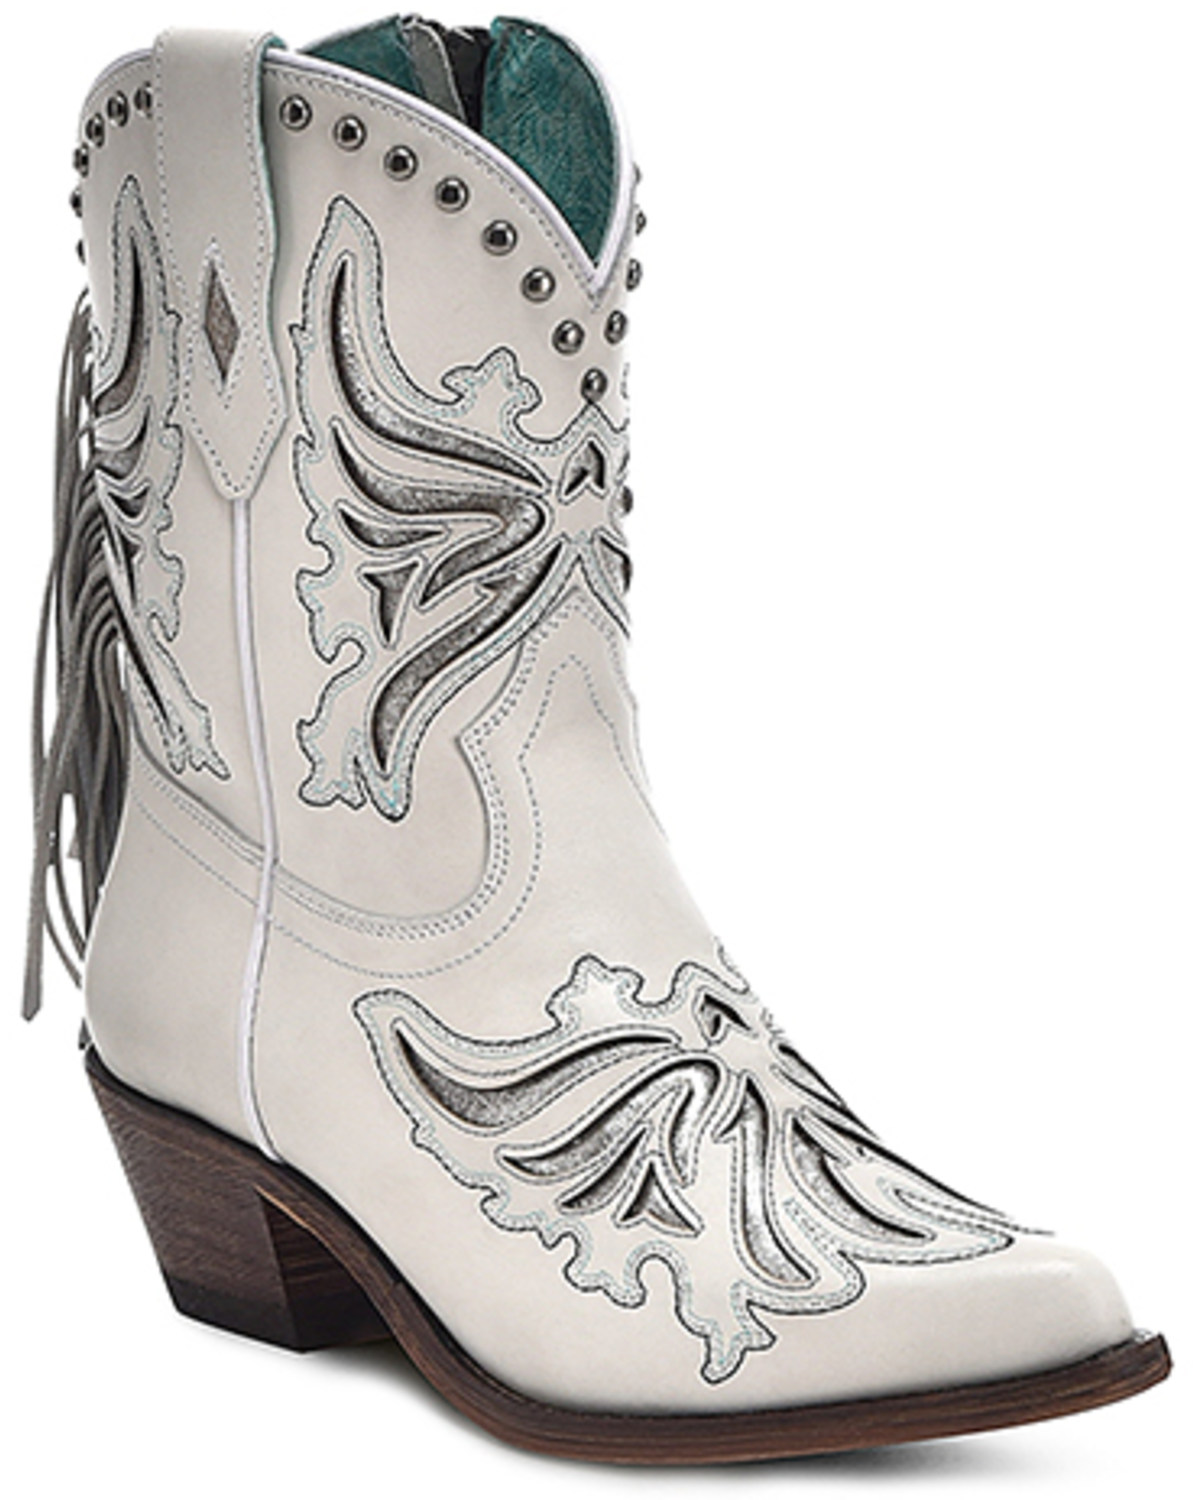 Corral Women's Fringe Inlay Ankle Western Boots - Pointed Toe